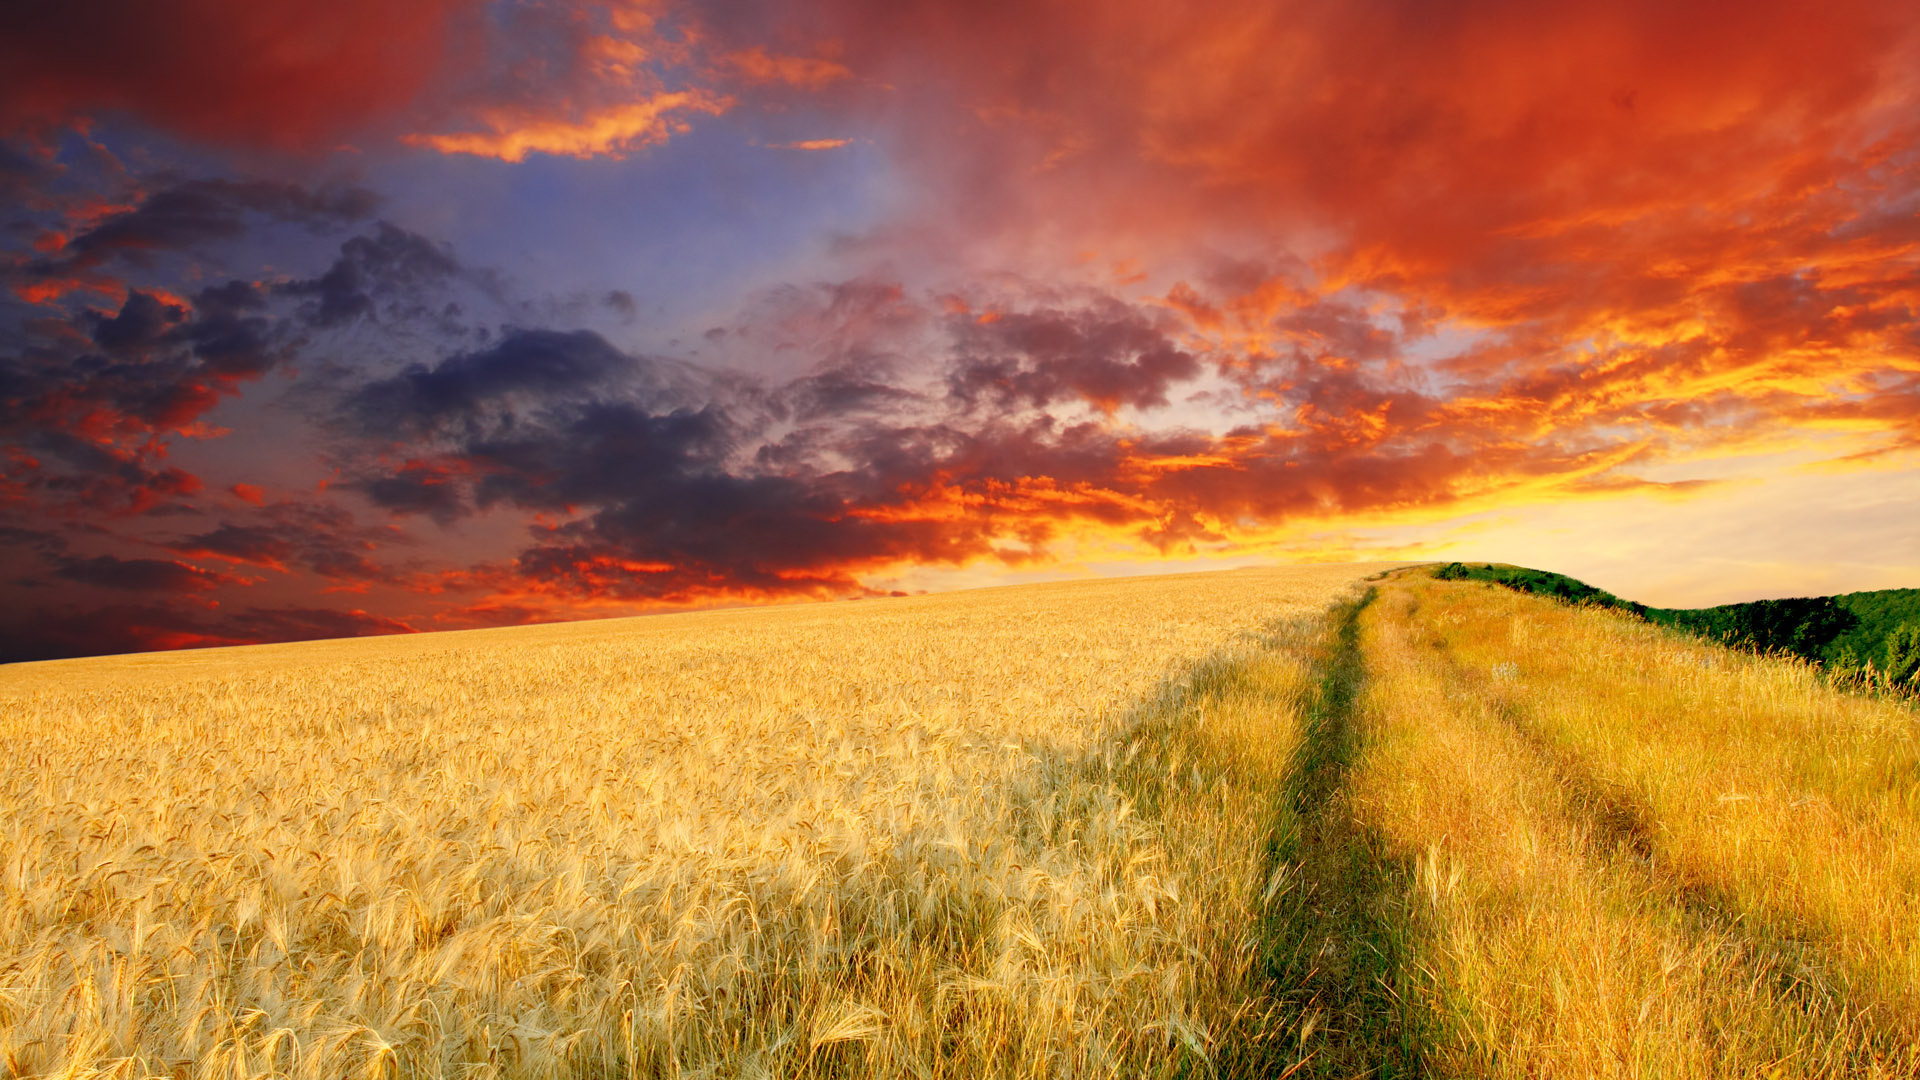 Farm: Farming, Cultivation of the soil for the growing of crops. 1920x1080 Full HD Wallpaper.